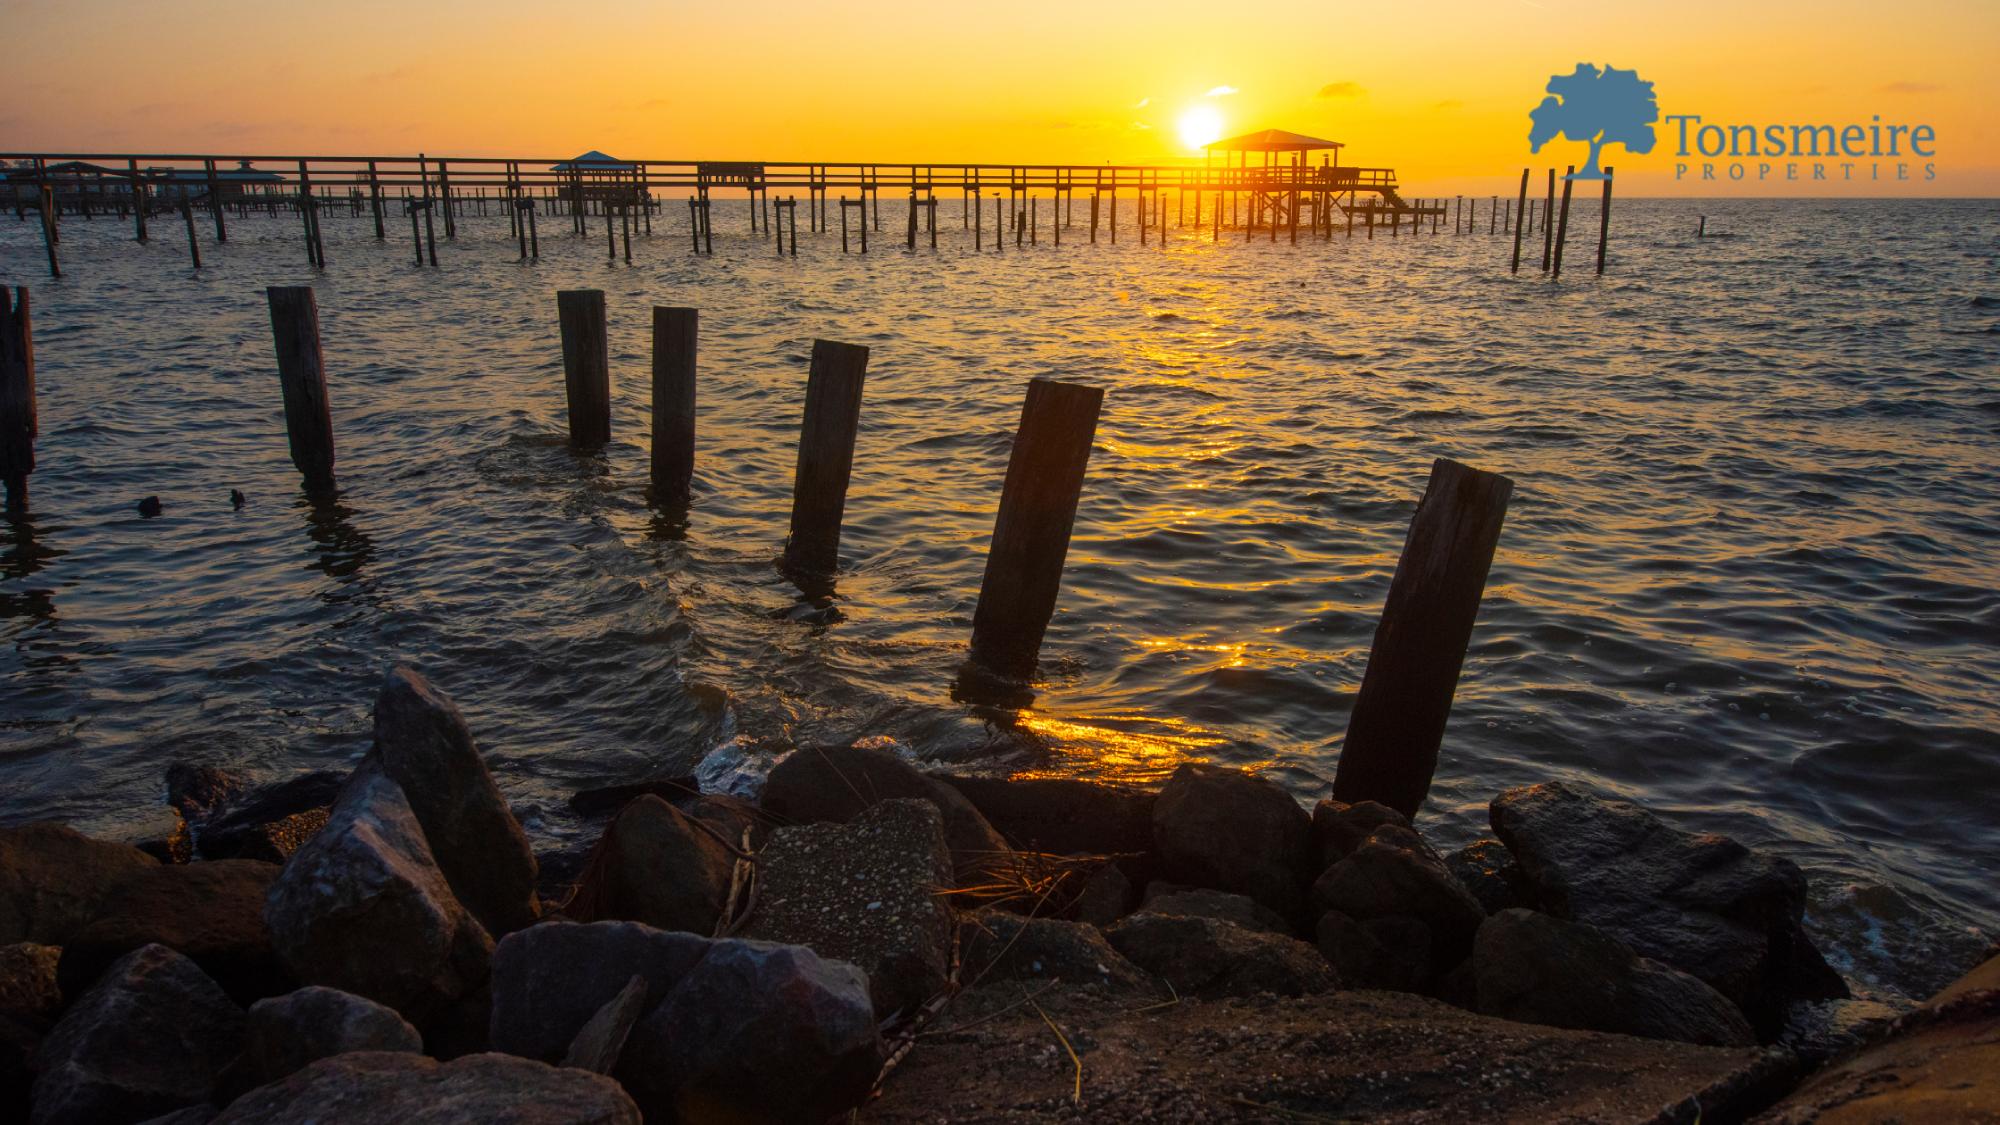 Fairhope, AL: A Great Place to Live, Work & Play